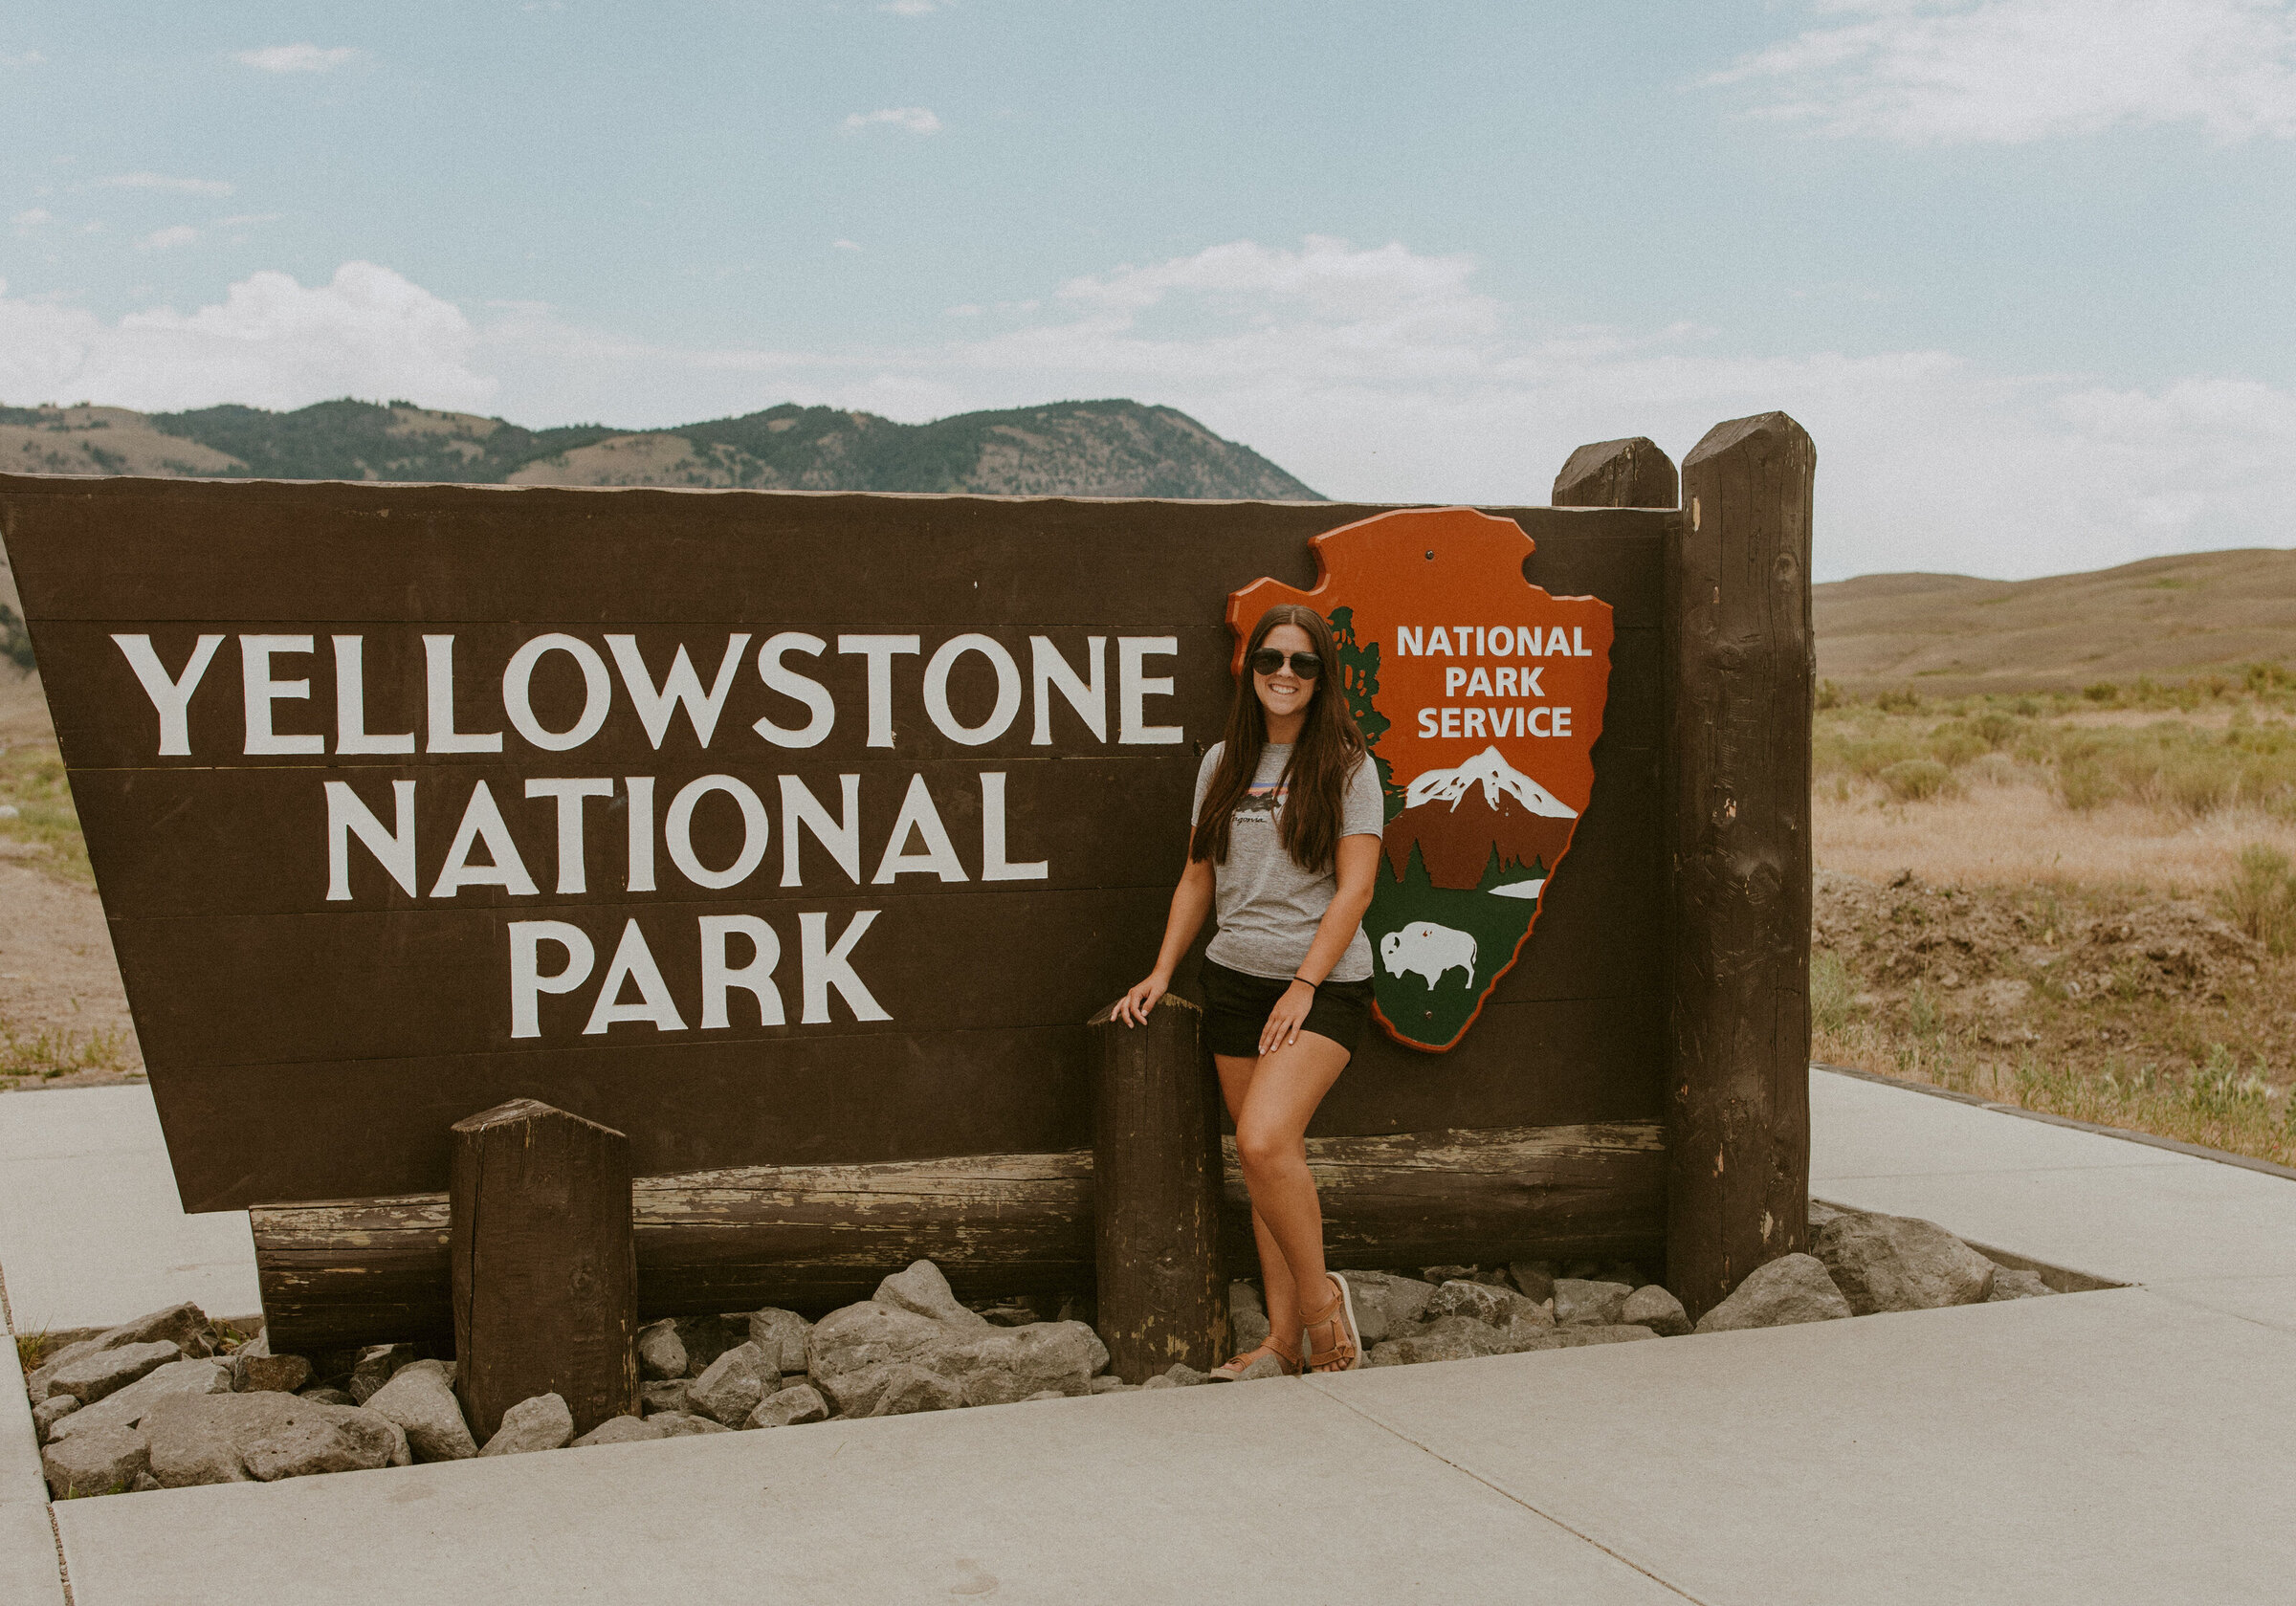 A girl standing by the welcome sign in Yellowstone National Park.